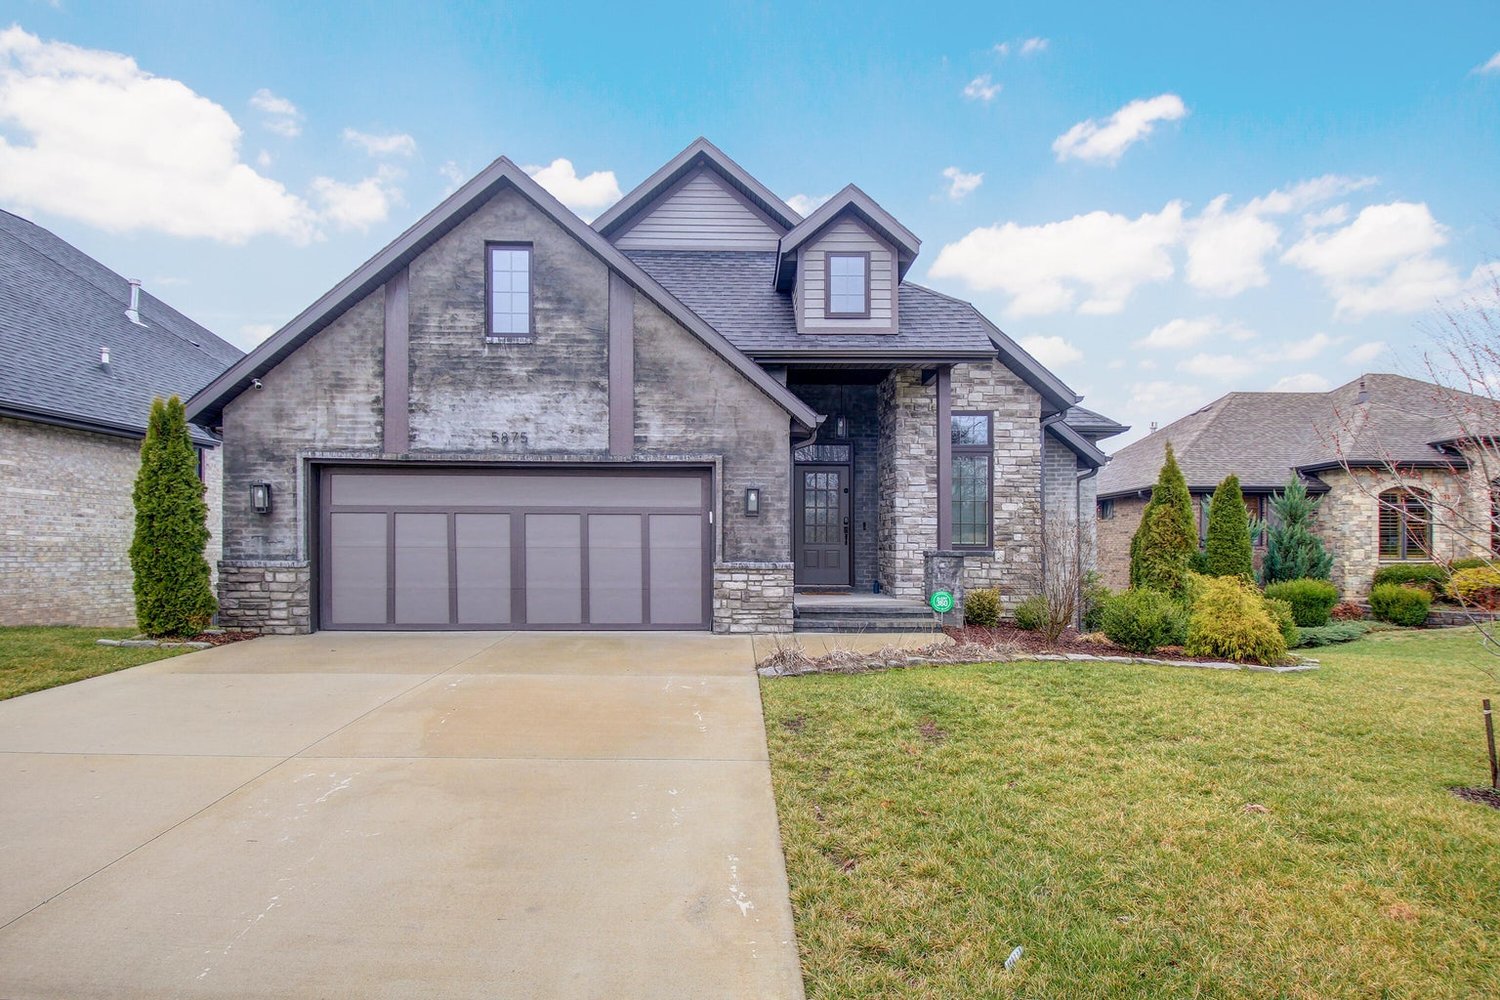 5875 S. Anthony Court
$674,900
Bedrooms: 5
Bathrooms: 3
Listing firm: Keller Williams Greater Springfield